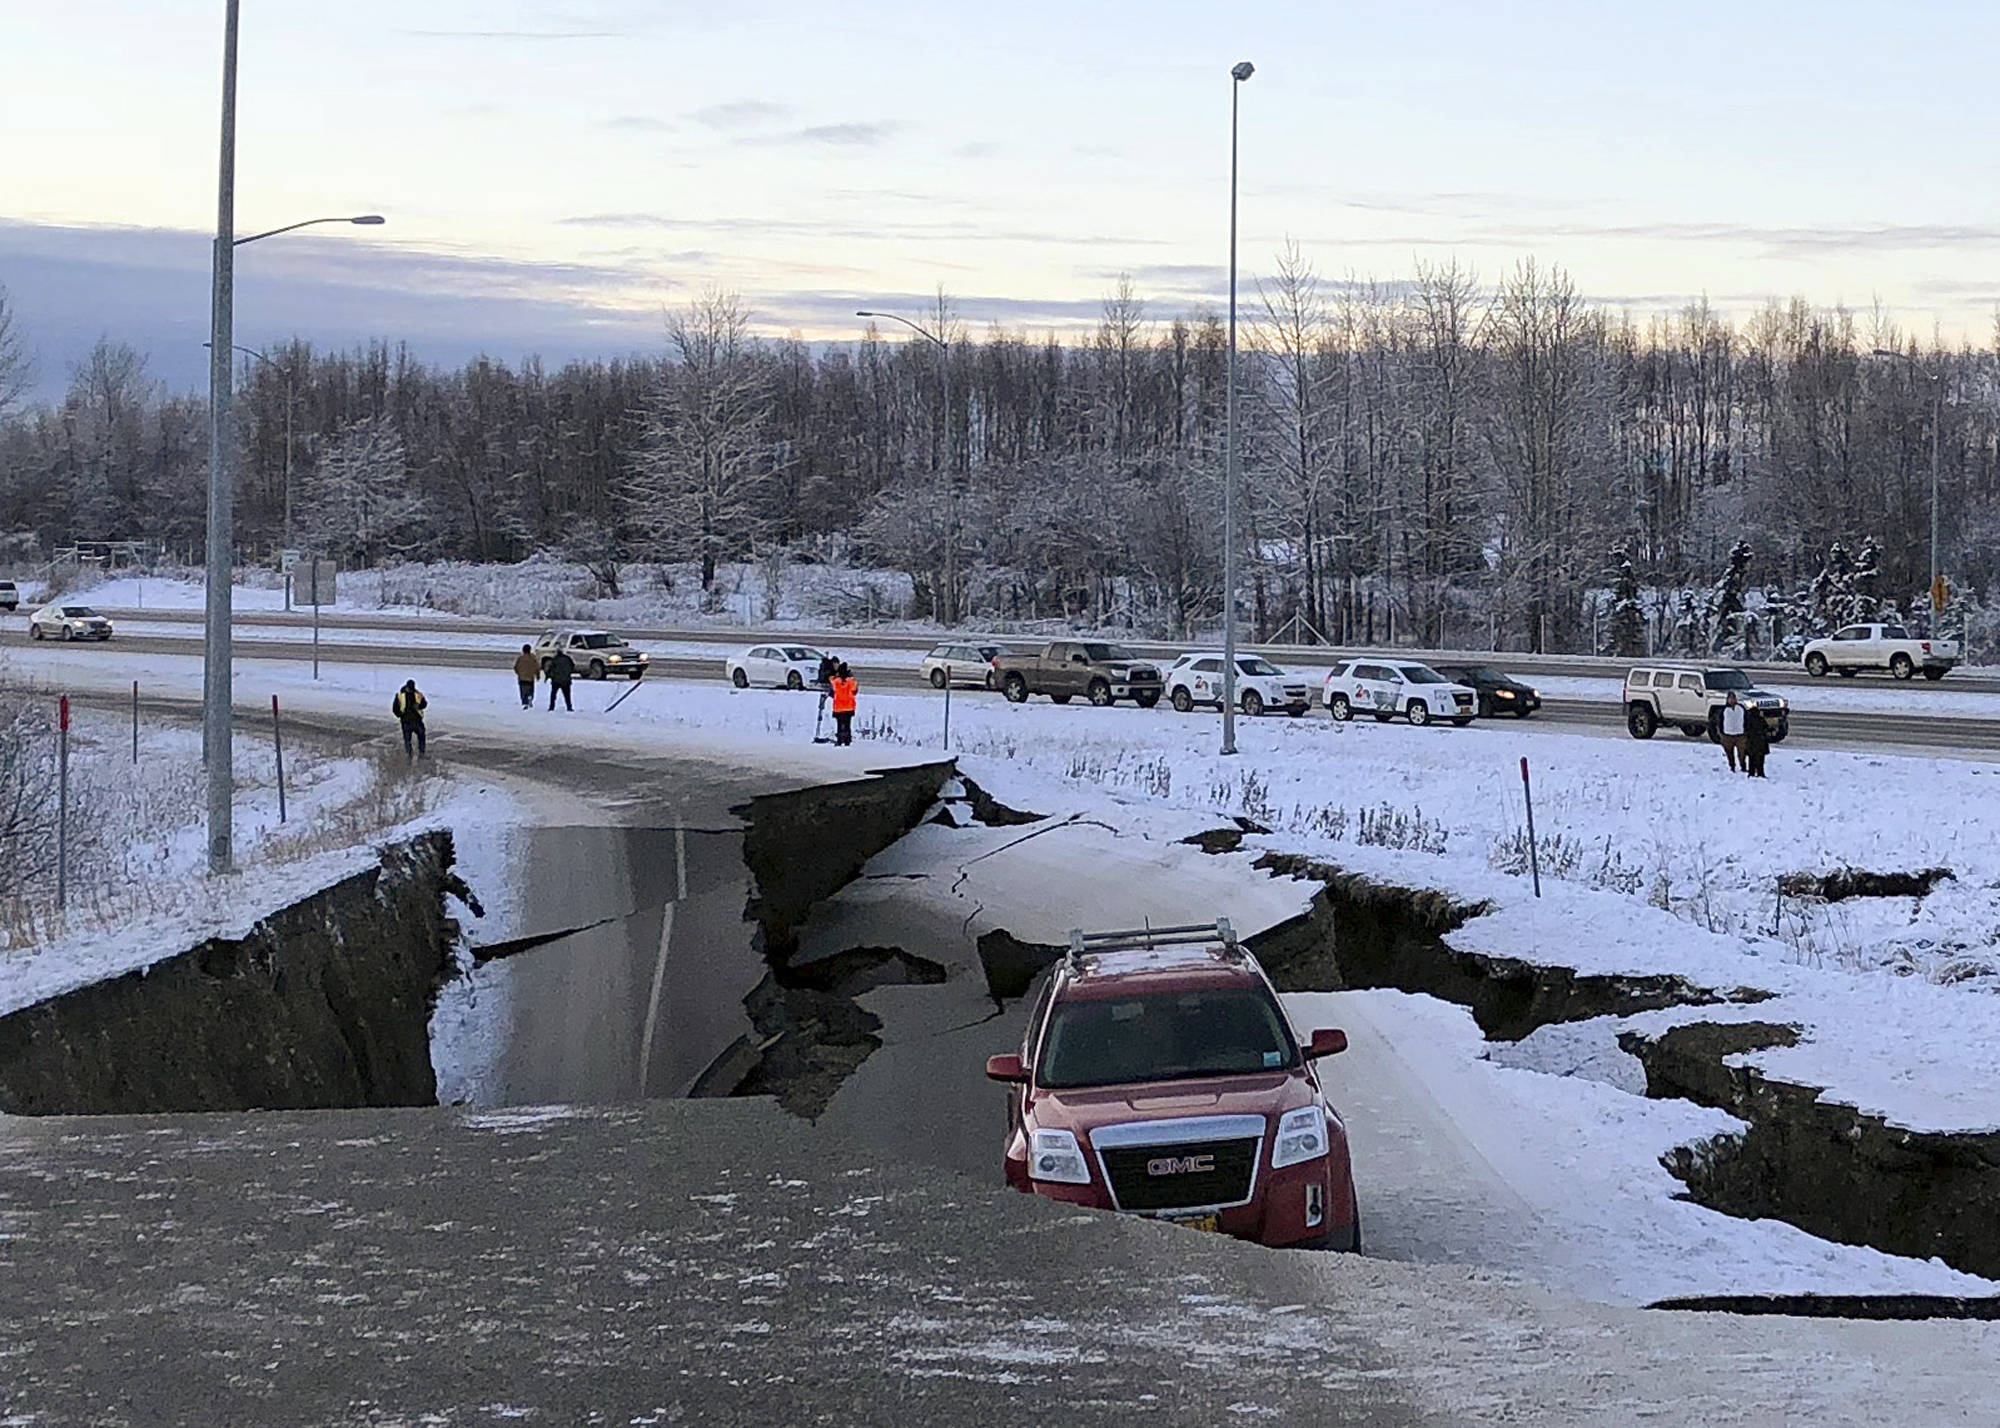 A car is trapped on a collapsed section of the offramp of Minnesota Drive in Anchorage, Friday, Nov. 30, 2018. Back-to-back earthquakes measuring 7.0 and 5.8 rocked buildings and buckled roads Friday morning in Anchorage, prompting people to run from their offices or seek shelter under office desks, while a tsunami warning had some seeking higher ground. (AP Photo/Dan Joling)